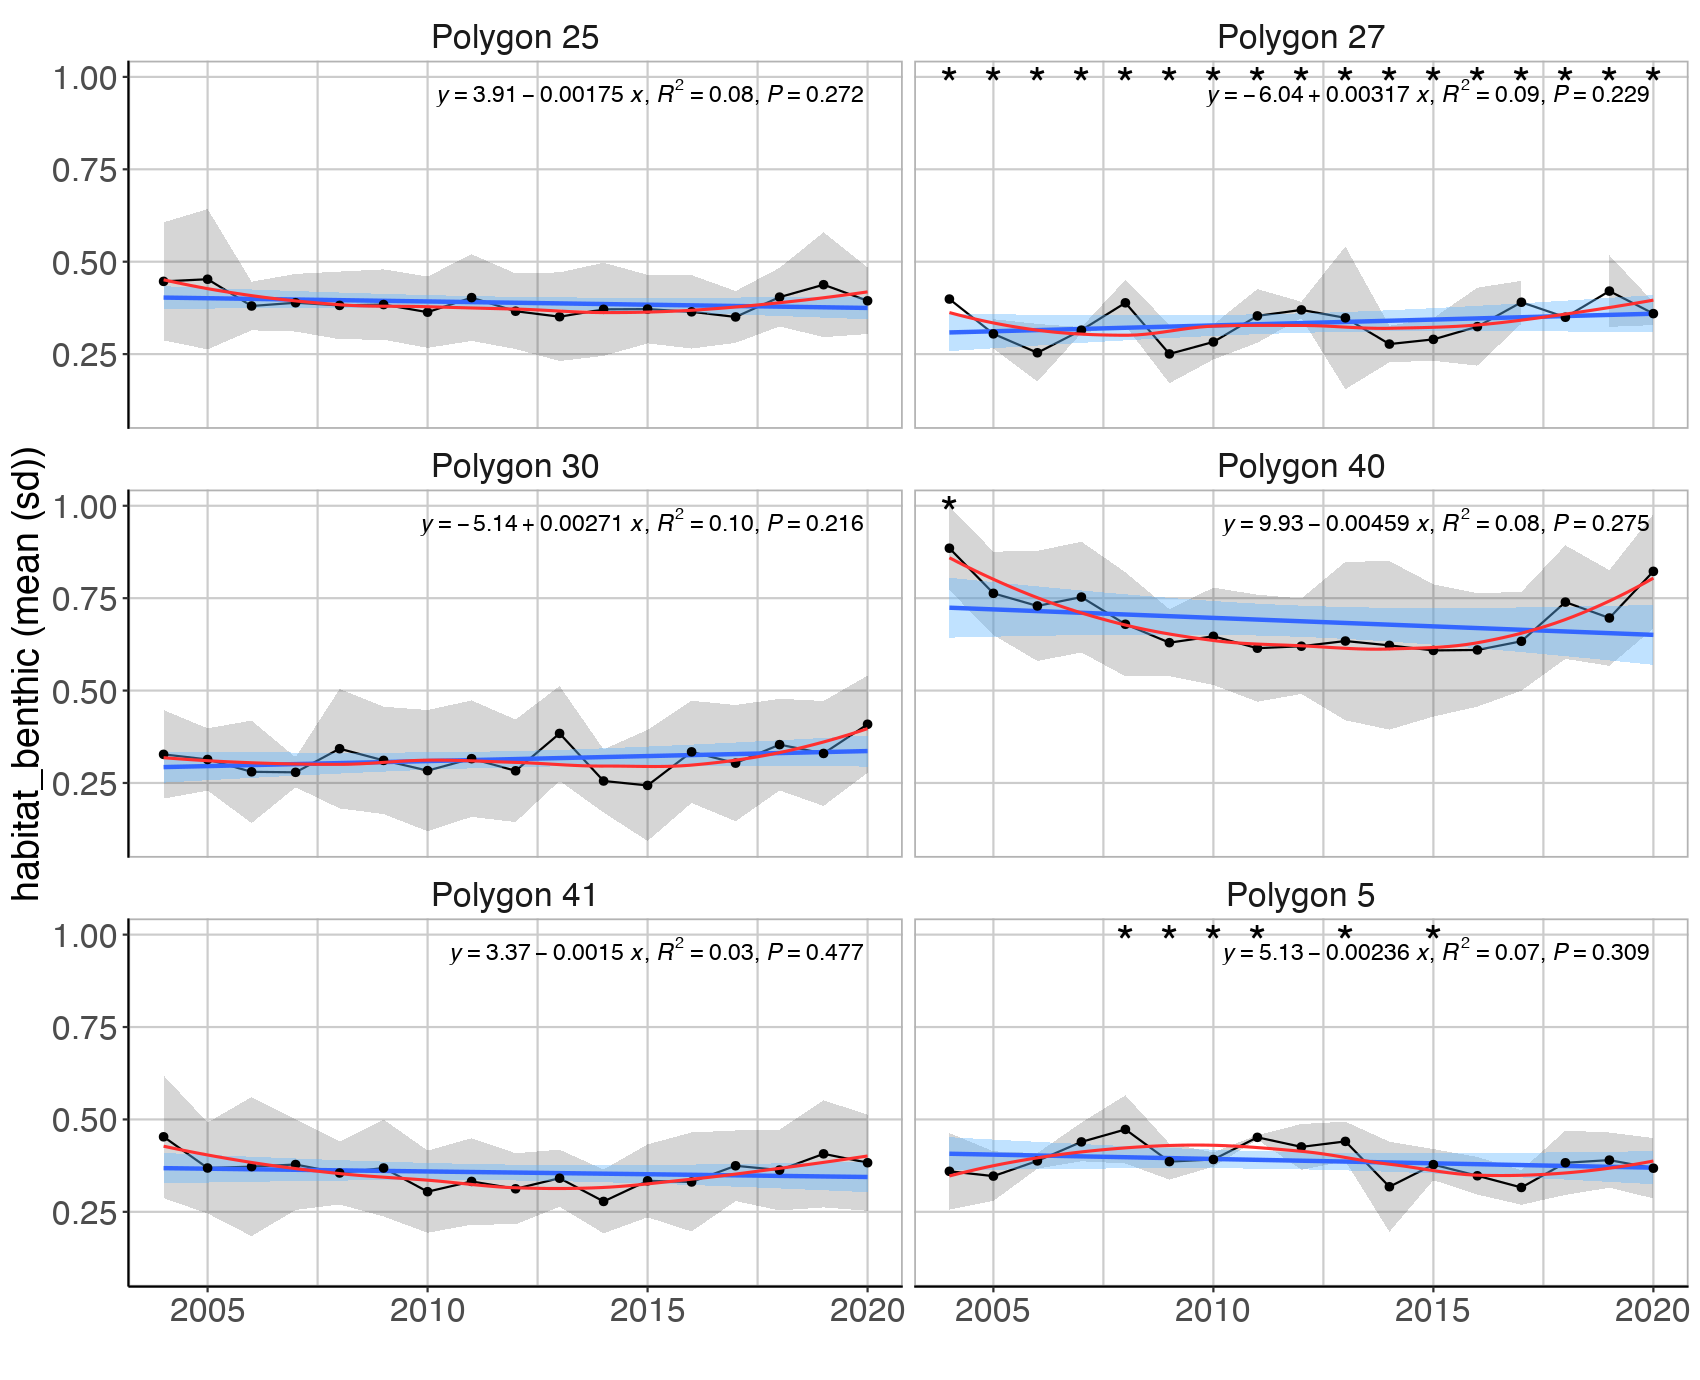 Figure S.16.3 Mean (± sd) log biomass proportion of benthic fish species excluding cod in the Sub-Arctic part of the Barents Sea (Black dots and grey shading). Linear regression fit with 95% CI is shown in blue, and the statistical results are given in the top of each plot. A local smoother is added in red to assist visual interpretation of non-linear changes during the period. Stars denote years with low sample size (< 5 trawls) .